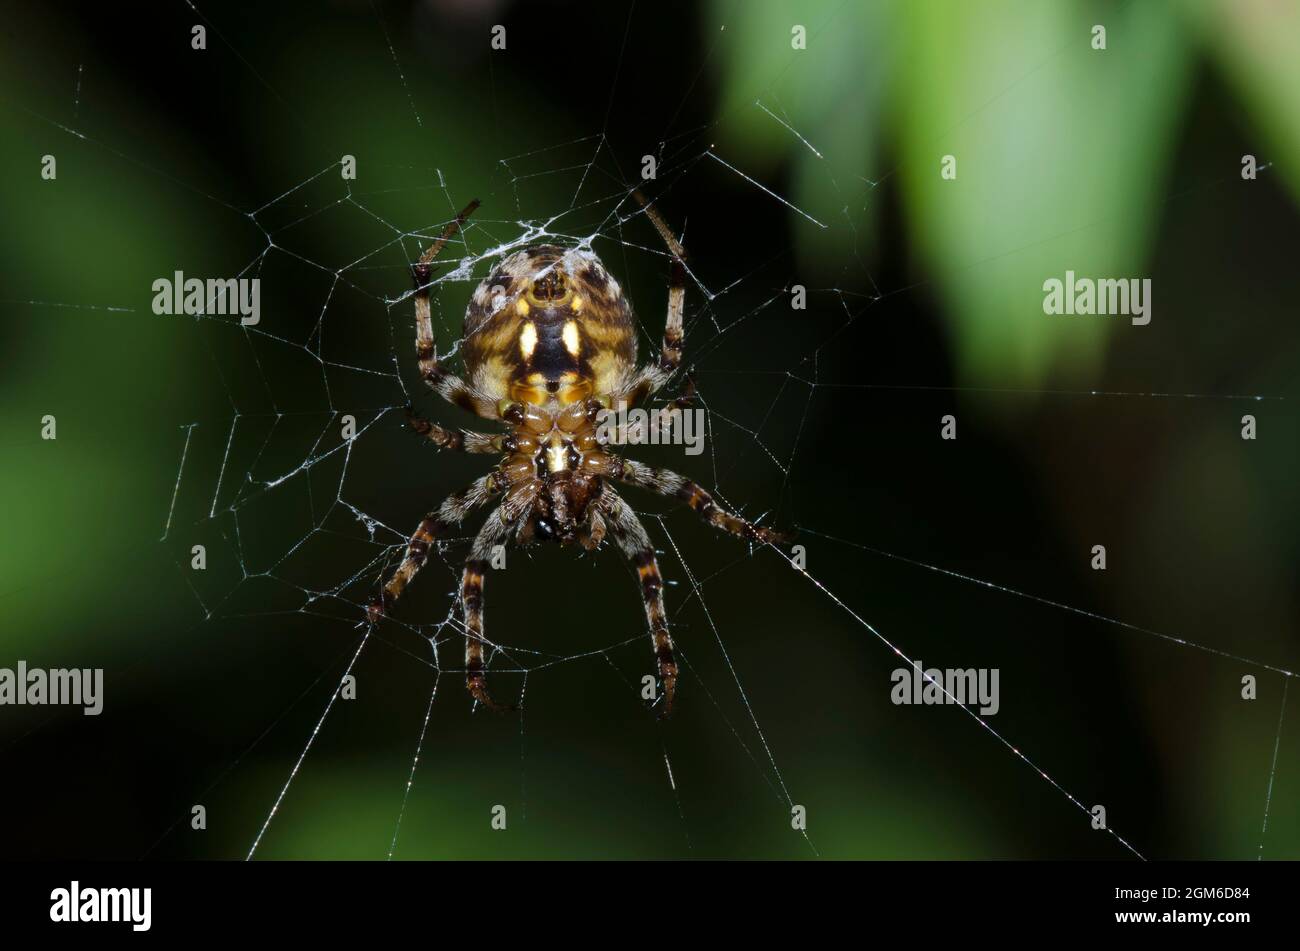 Spotted Orbweaver, Neoscona sp.  Photographed at night. Stock Photo